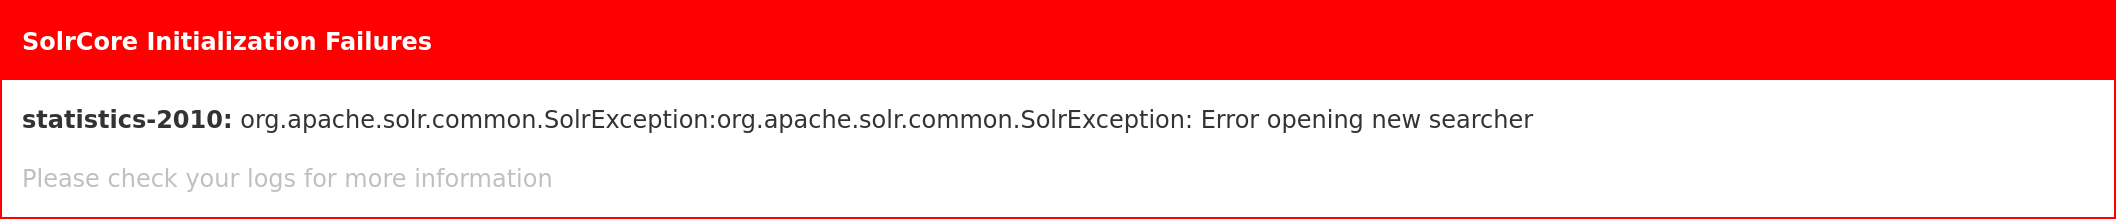 Error message in Solr admin UI about the statistics-2010 core failing to load